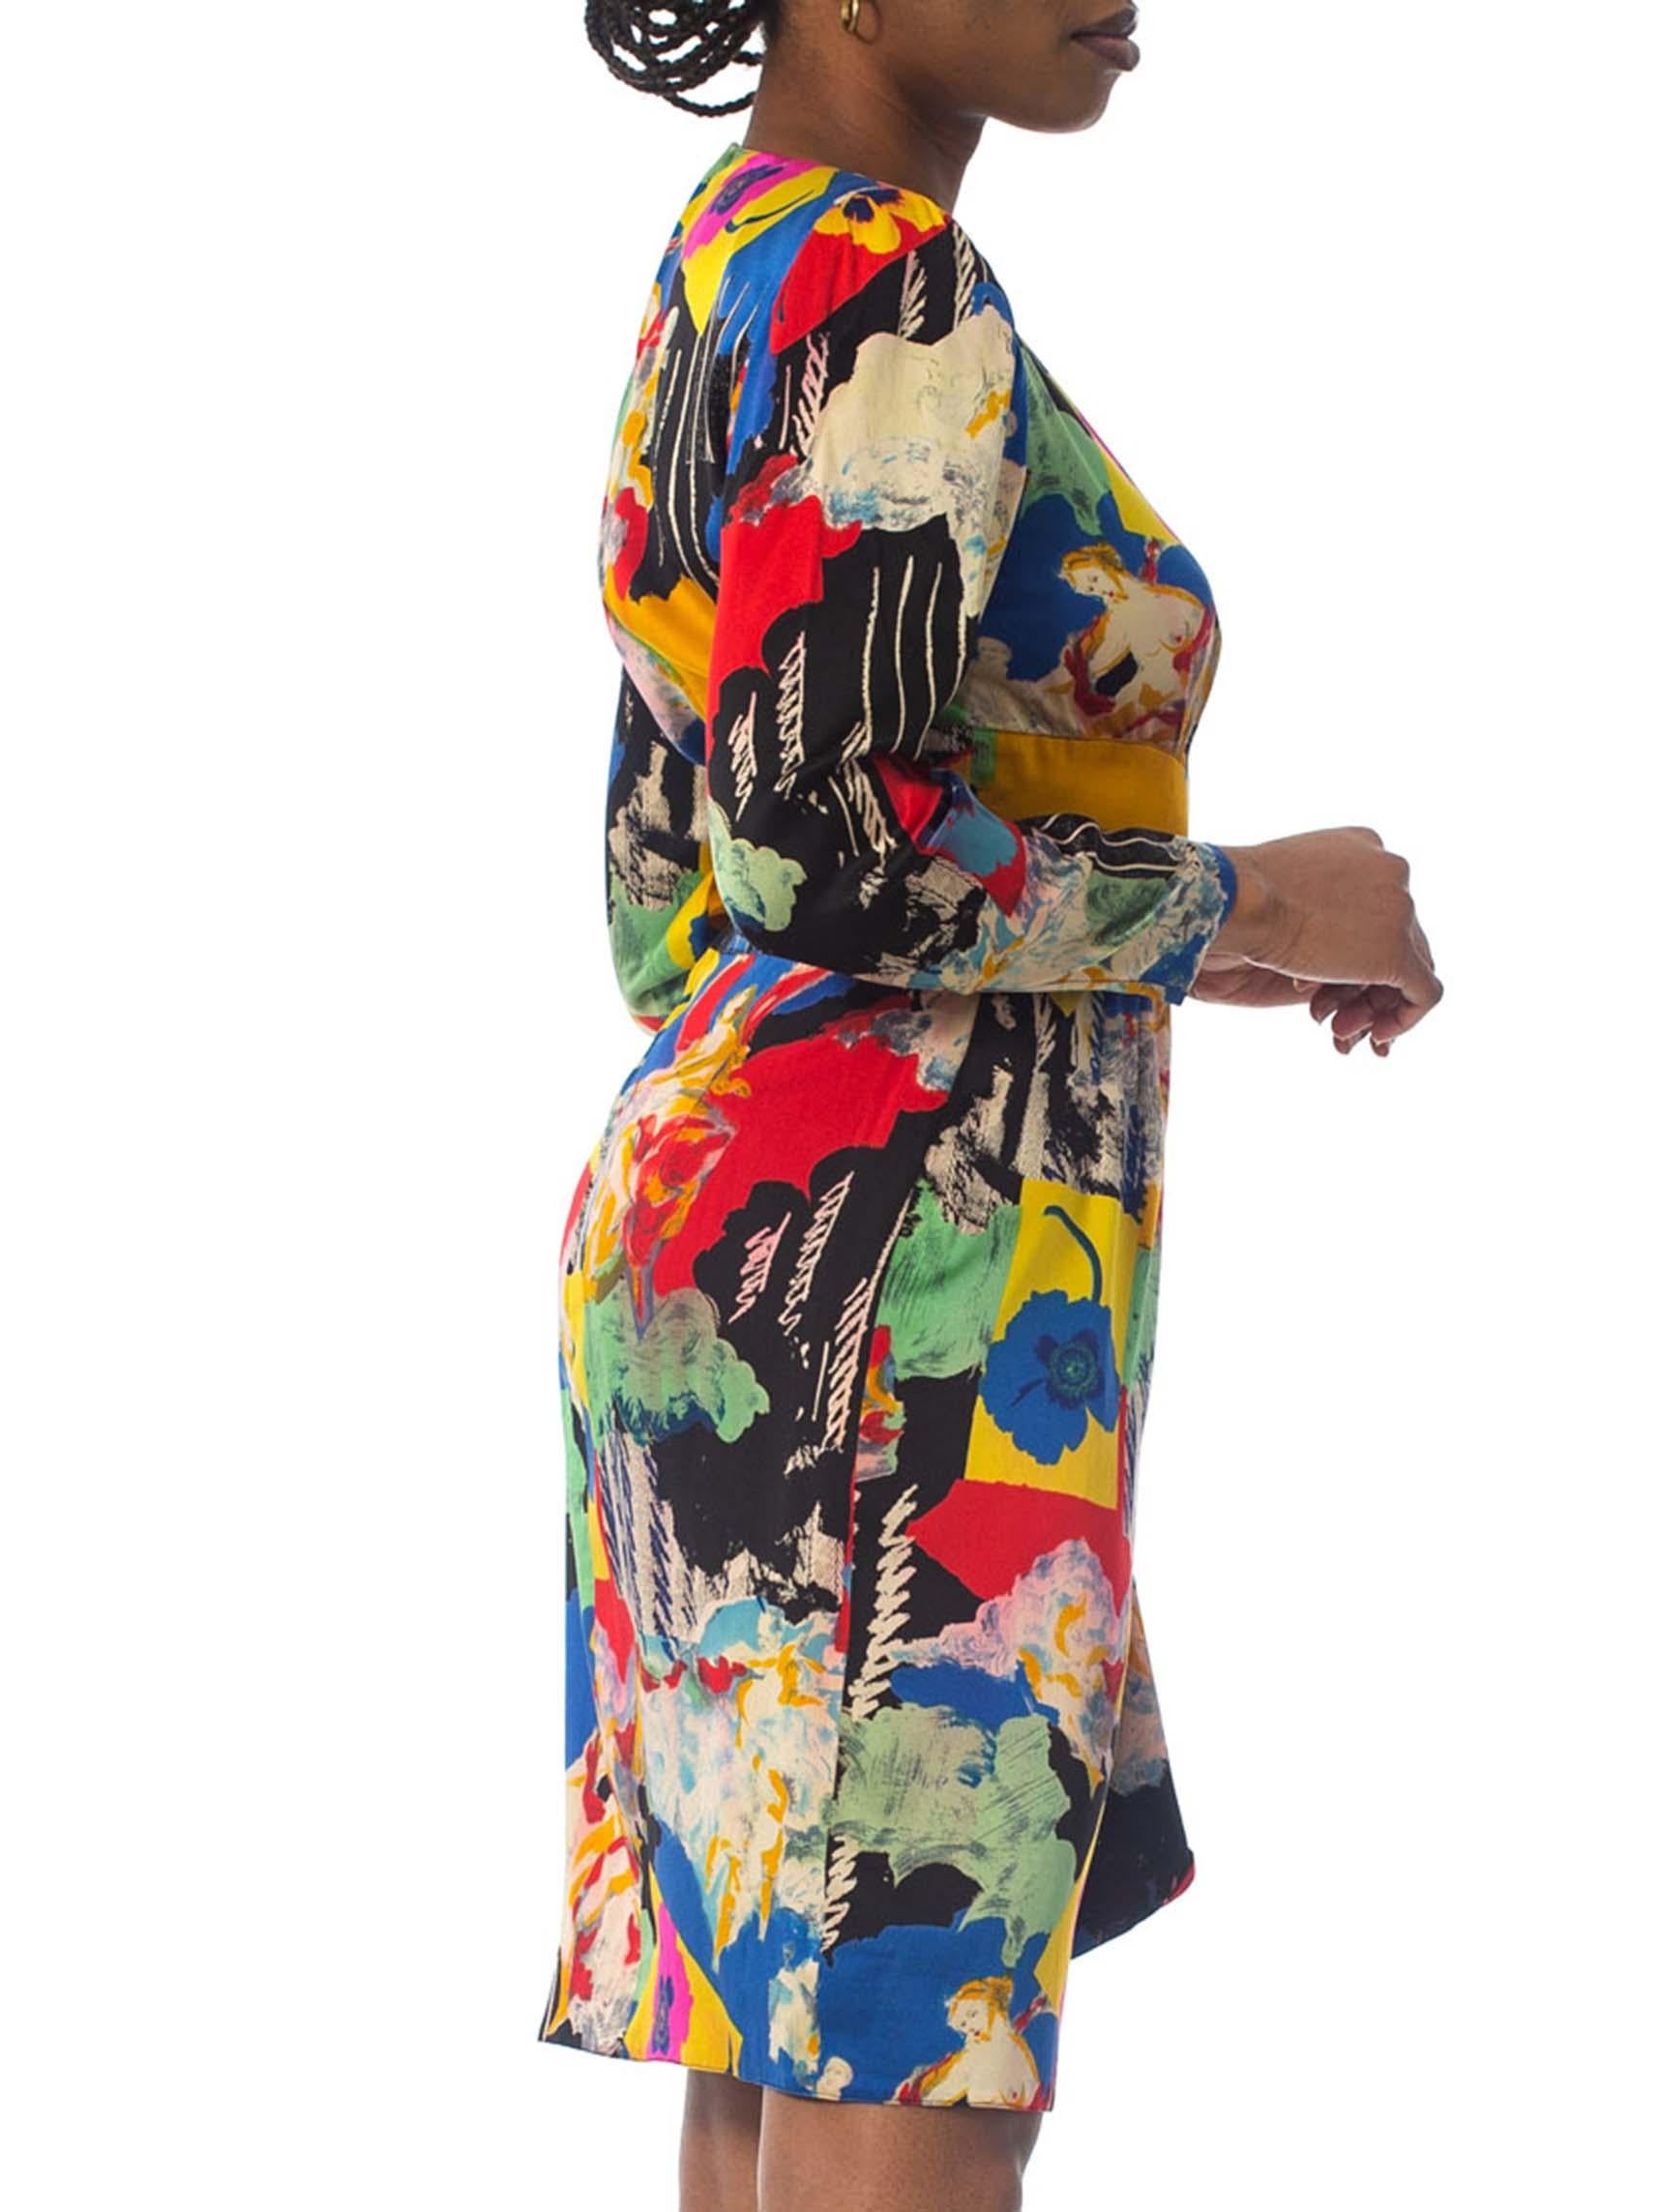 Women's 1980S EMANUEL UNGARO Printed Silk Charmeuse Day To Cocktail Dress